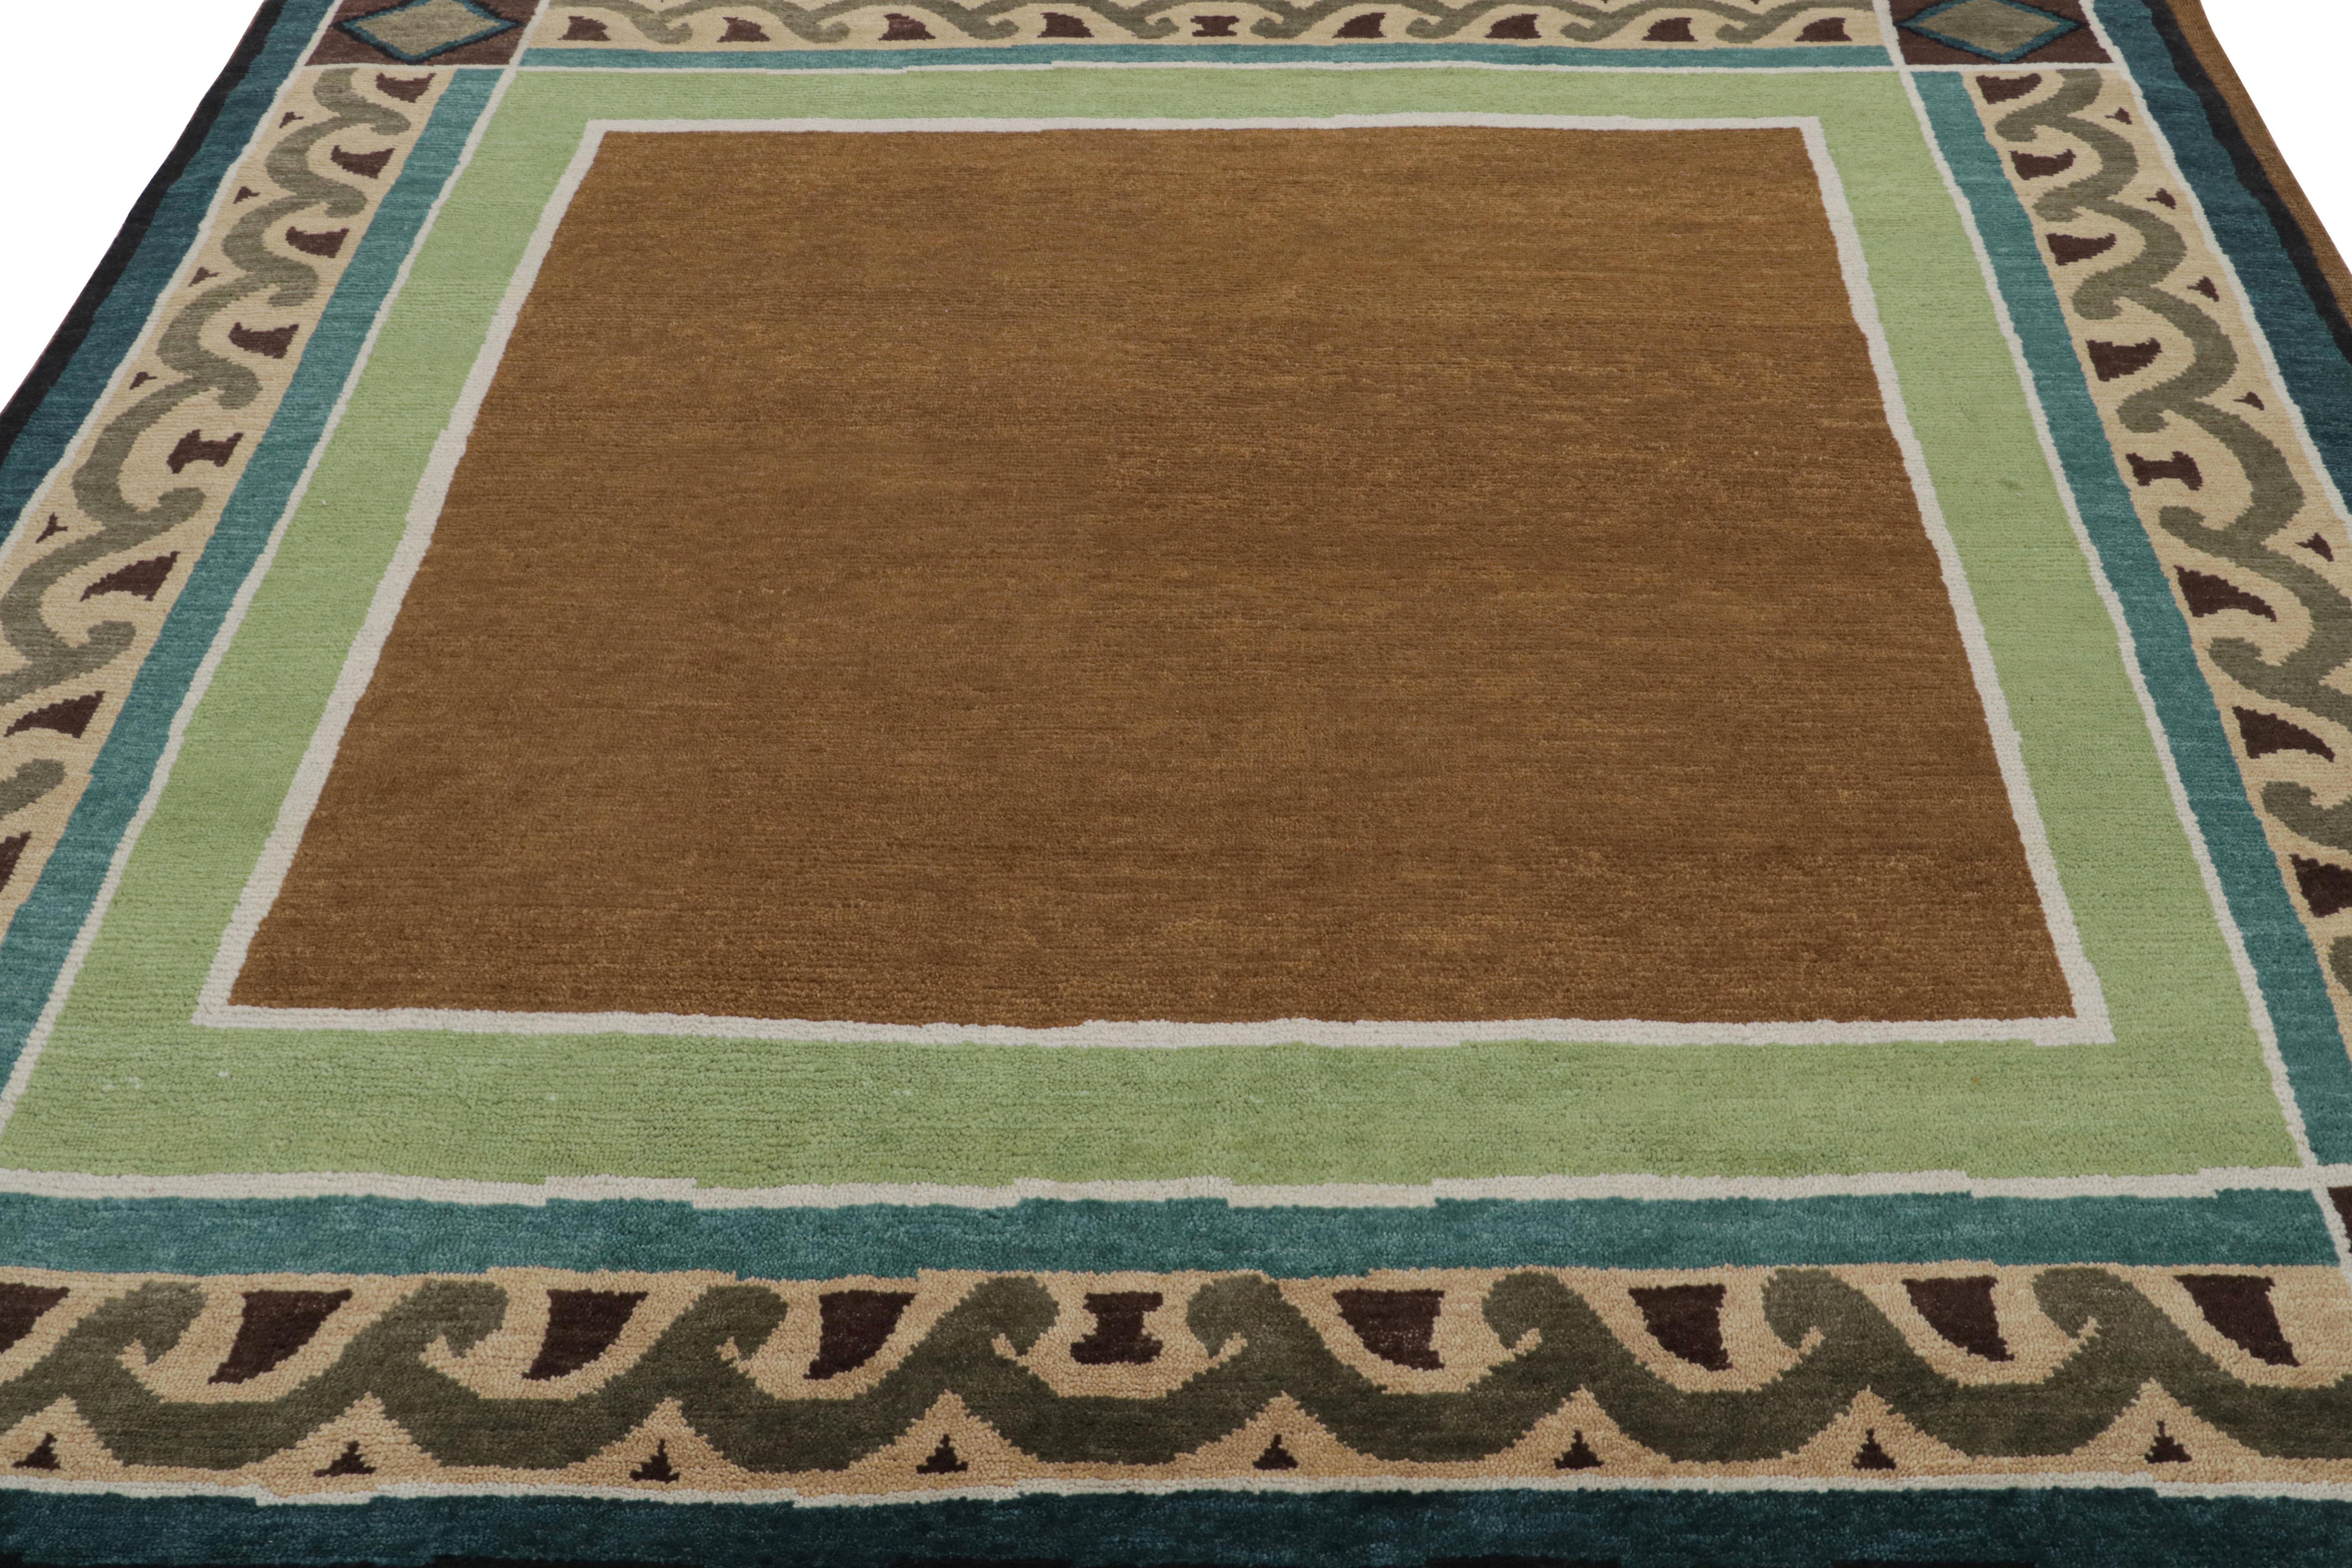 Indian Rug & Kilim’s French Art Deco style Square Rug with Brown Open Field